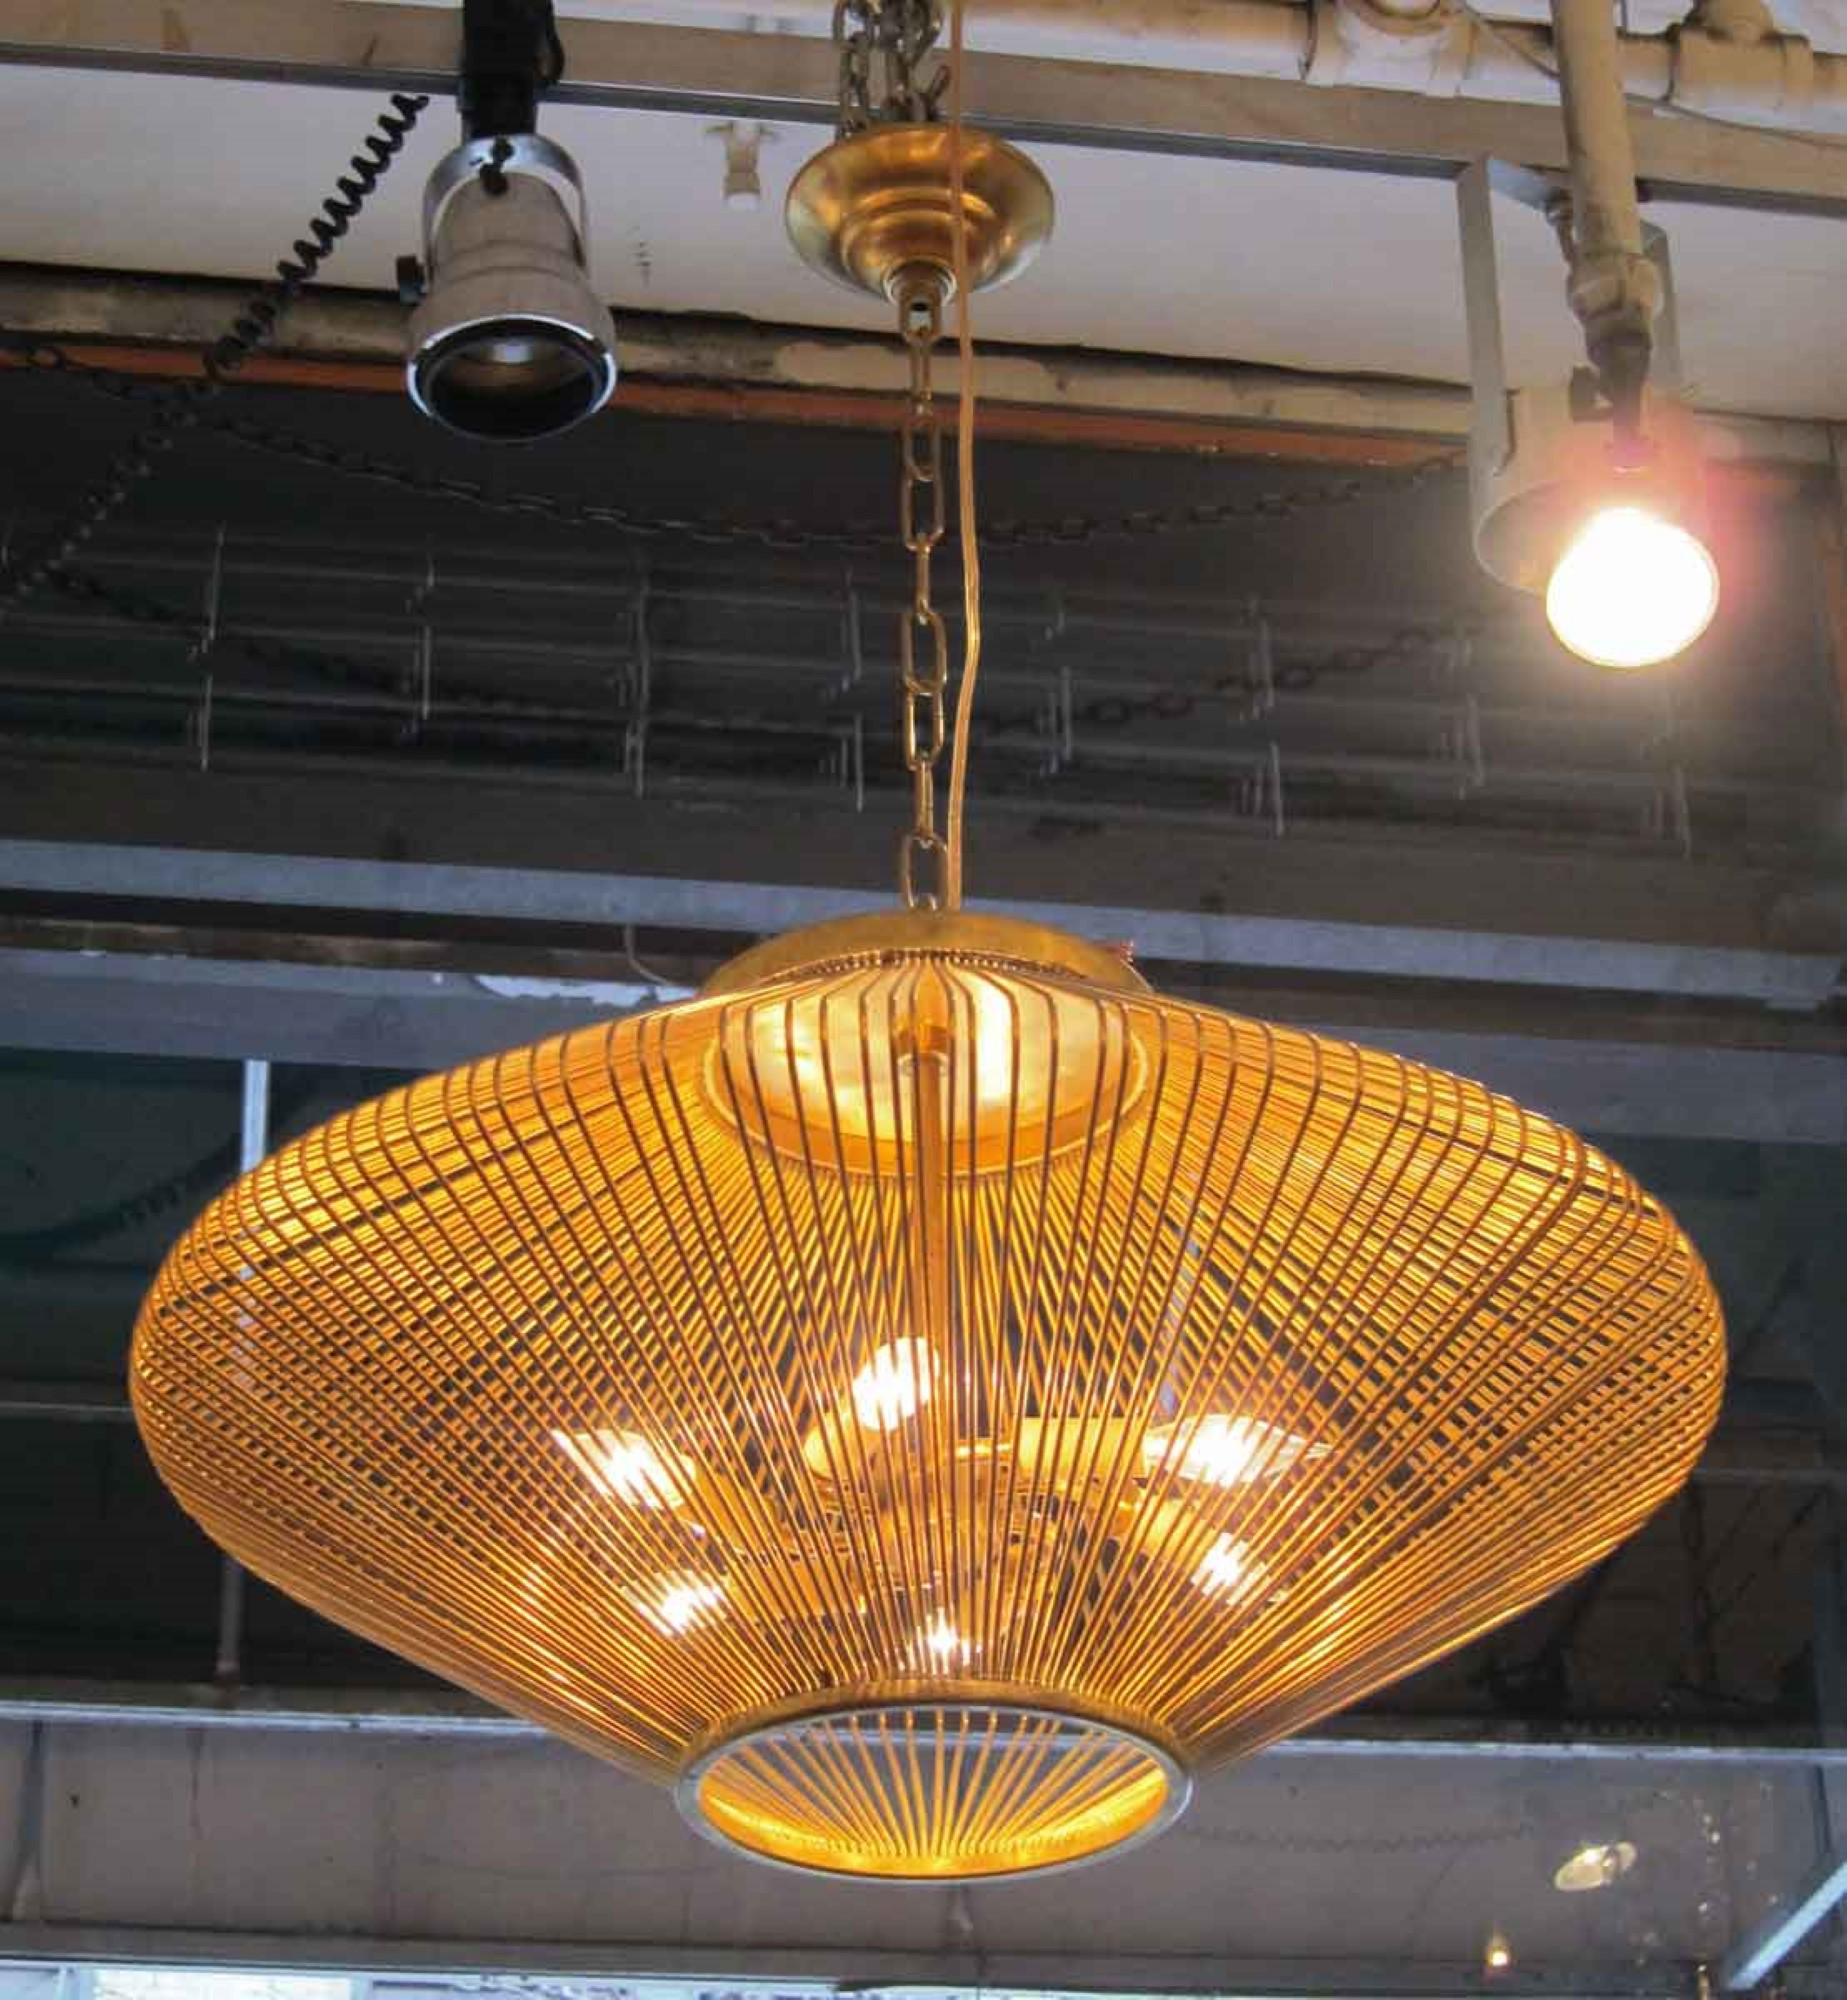 1990s Mid-Century Modern style diamond cage shaped pendant light done in a gold finish. Cleaned and wired. This light has 6 sockets. Small quantity available at time of posting. Please inquire. Priced each. Please note, this item is located in one